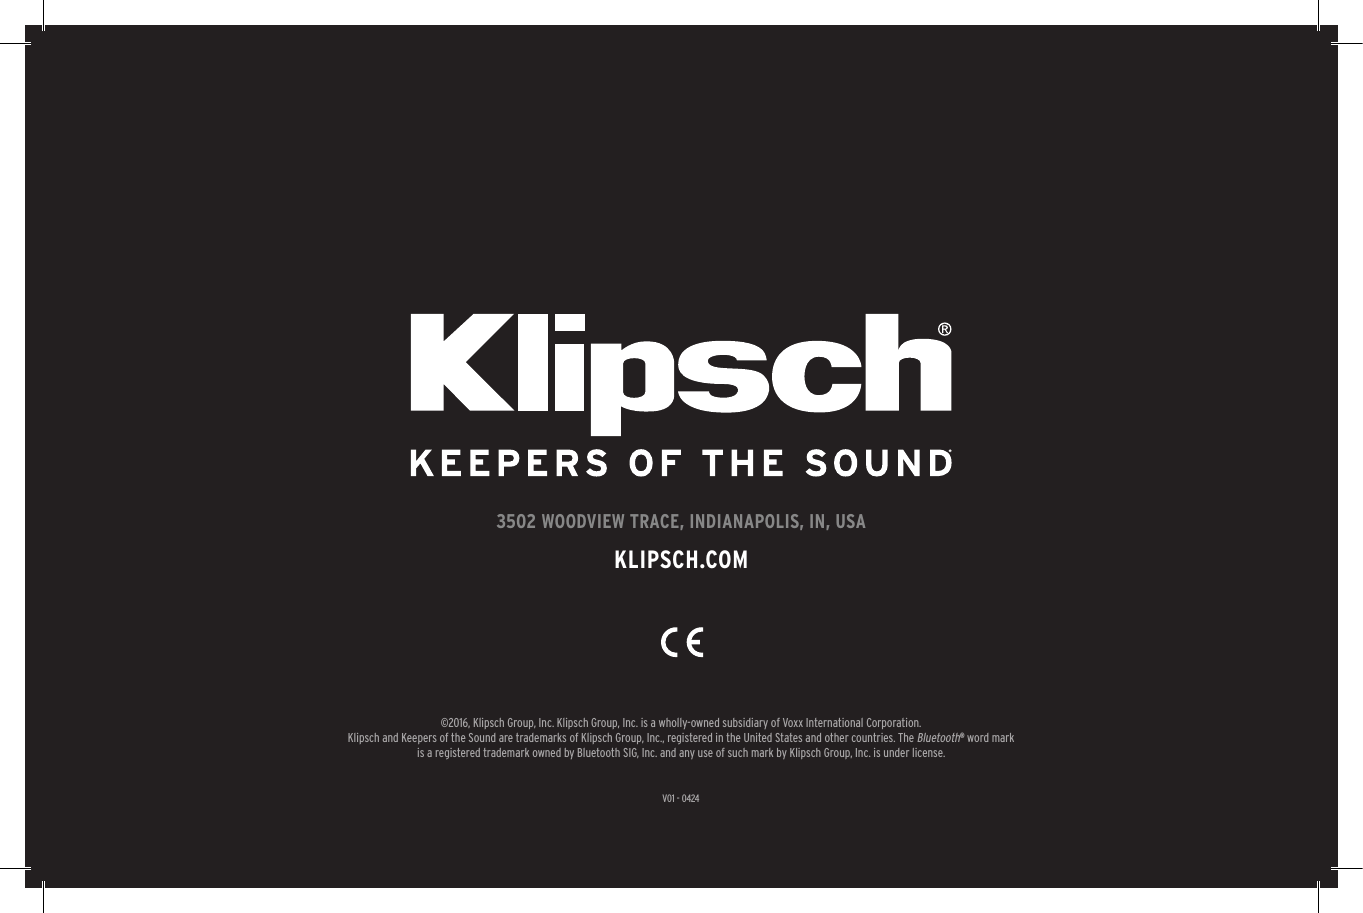 V01 - 04243502 WOODVIEW TRACE, INDIANAPOLIS, IN, USAKLIPSCH.COM©2016, Klipsch Group, Inc. Klipsch Group, Inc. is a wholly-owned subsidiary of Voxx International Corporation.Klipsch and Keepers of the Sound are trademarks of Klipsch Group, Inc., registered in the United States and other countries. The Bluetooth® word mark is a registered trademark owned by Bluetooth SIG, Inc. and any use of such mark by Klipsch Group, Inc. is under license. 